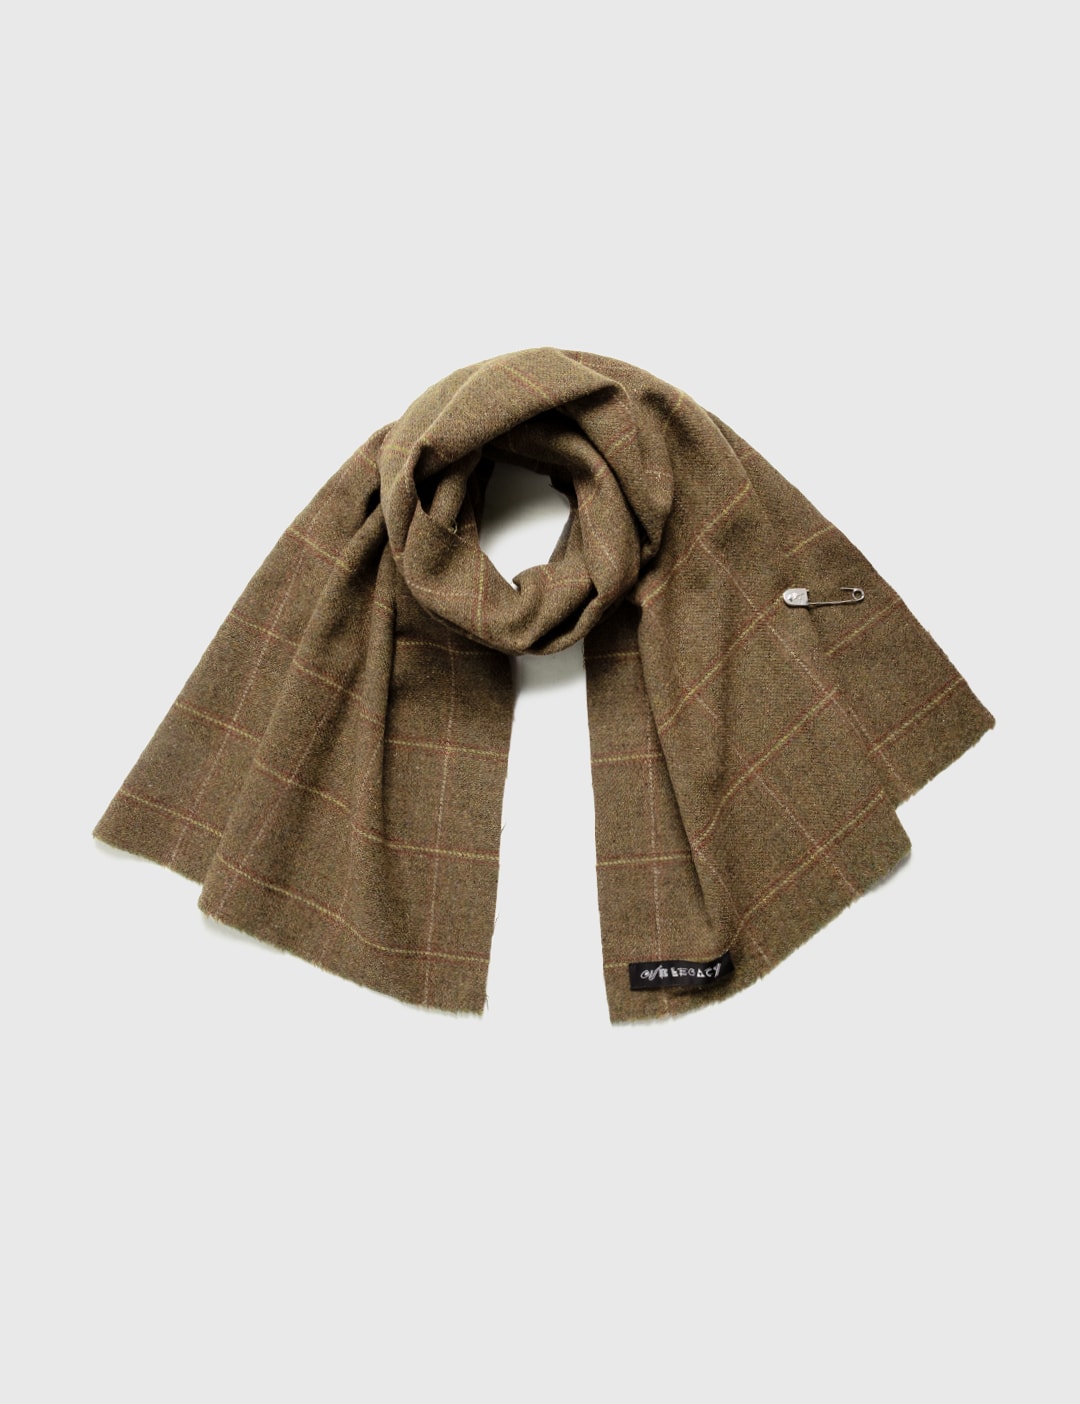 Louis Vuitton Wool Striped Scarf w/ Tags - Brown Scarves and